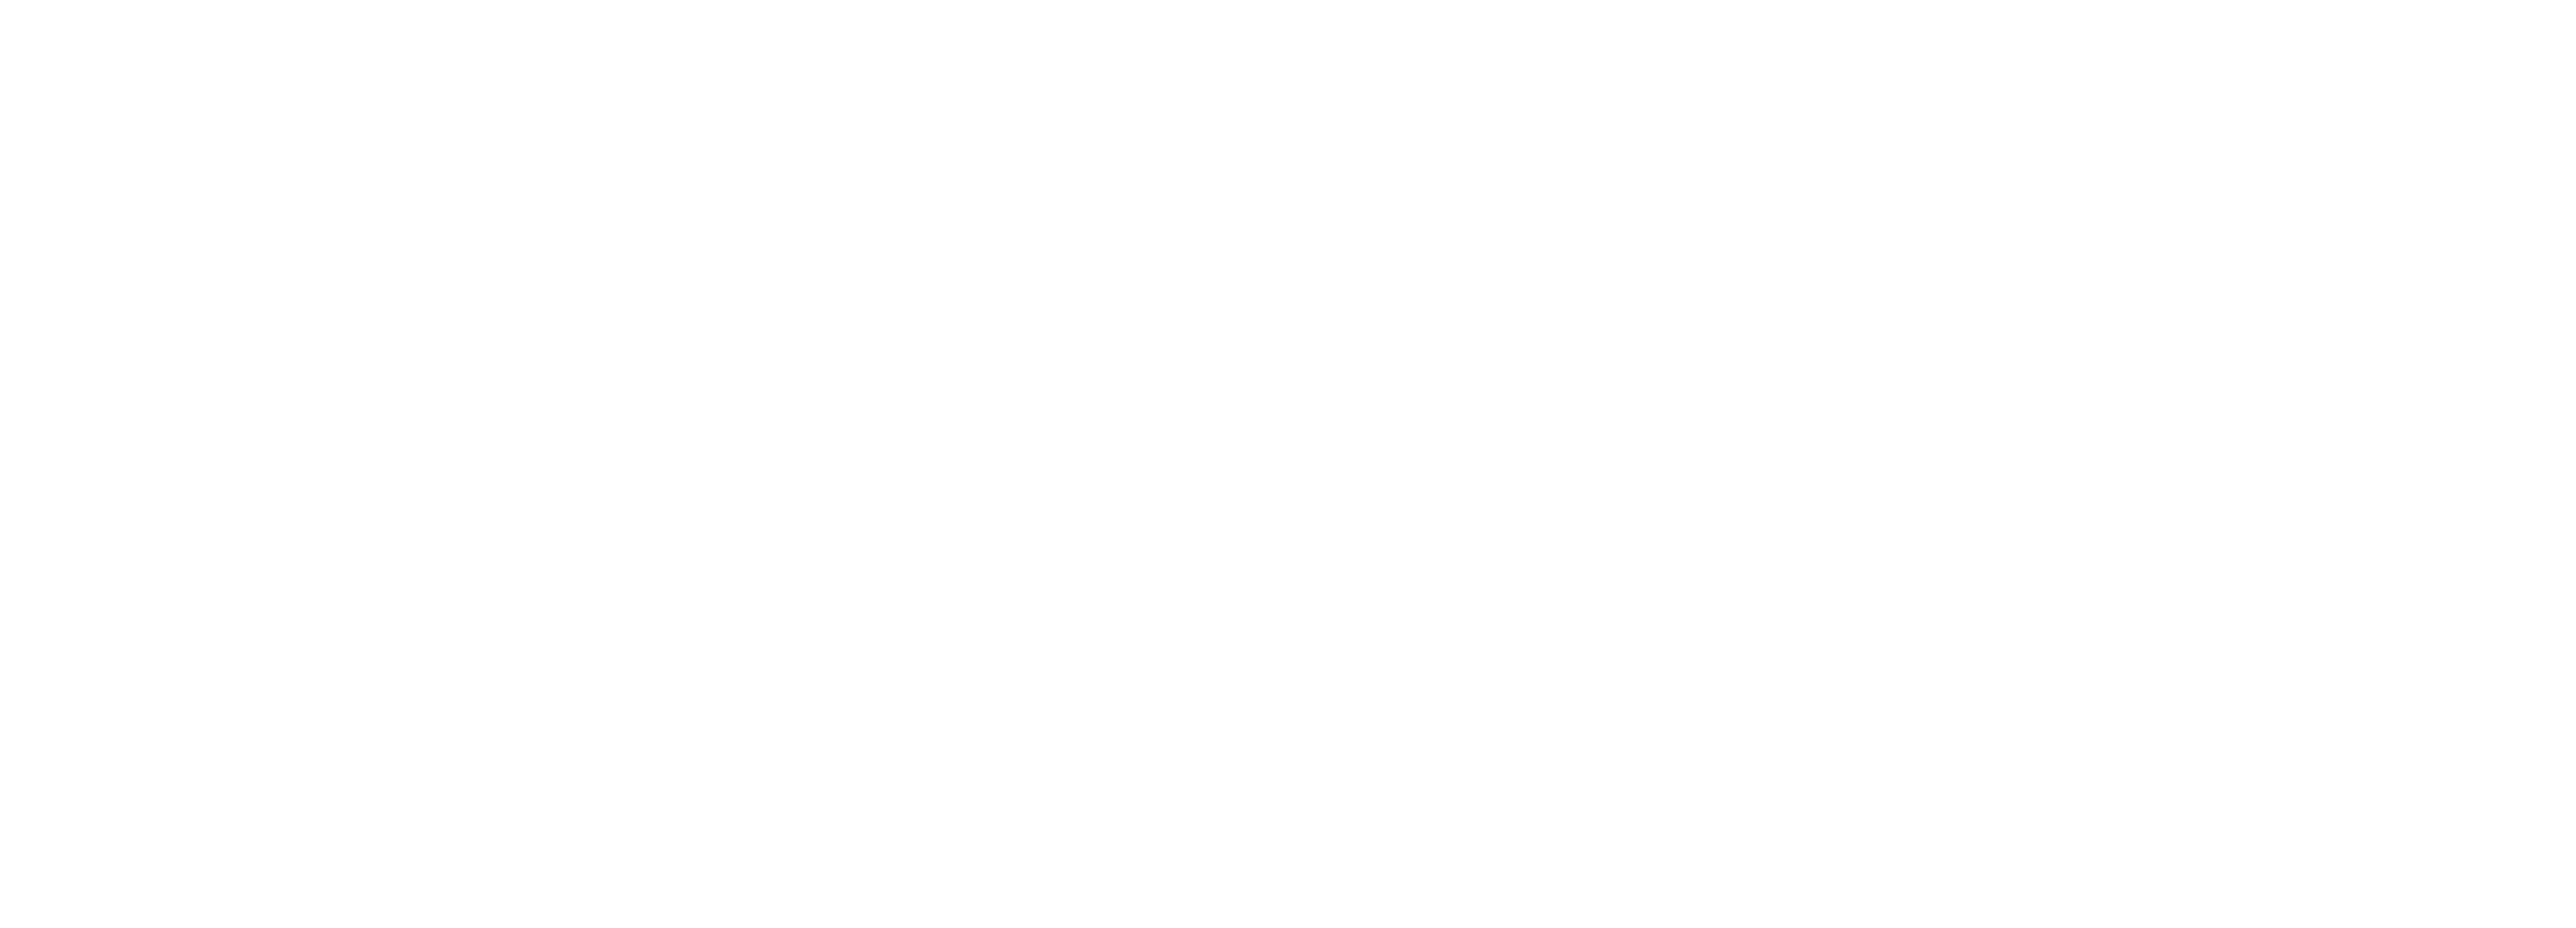 frontier-connected-for-multifamily-managers-frontier-fiber-internet